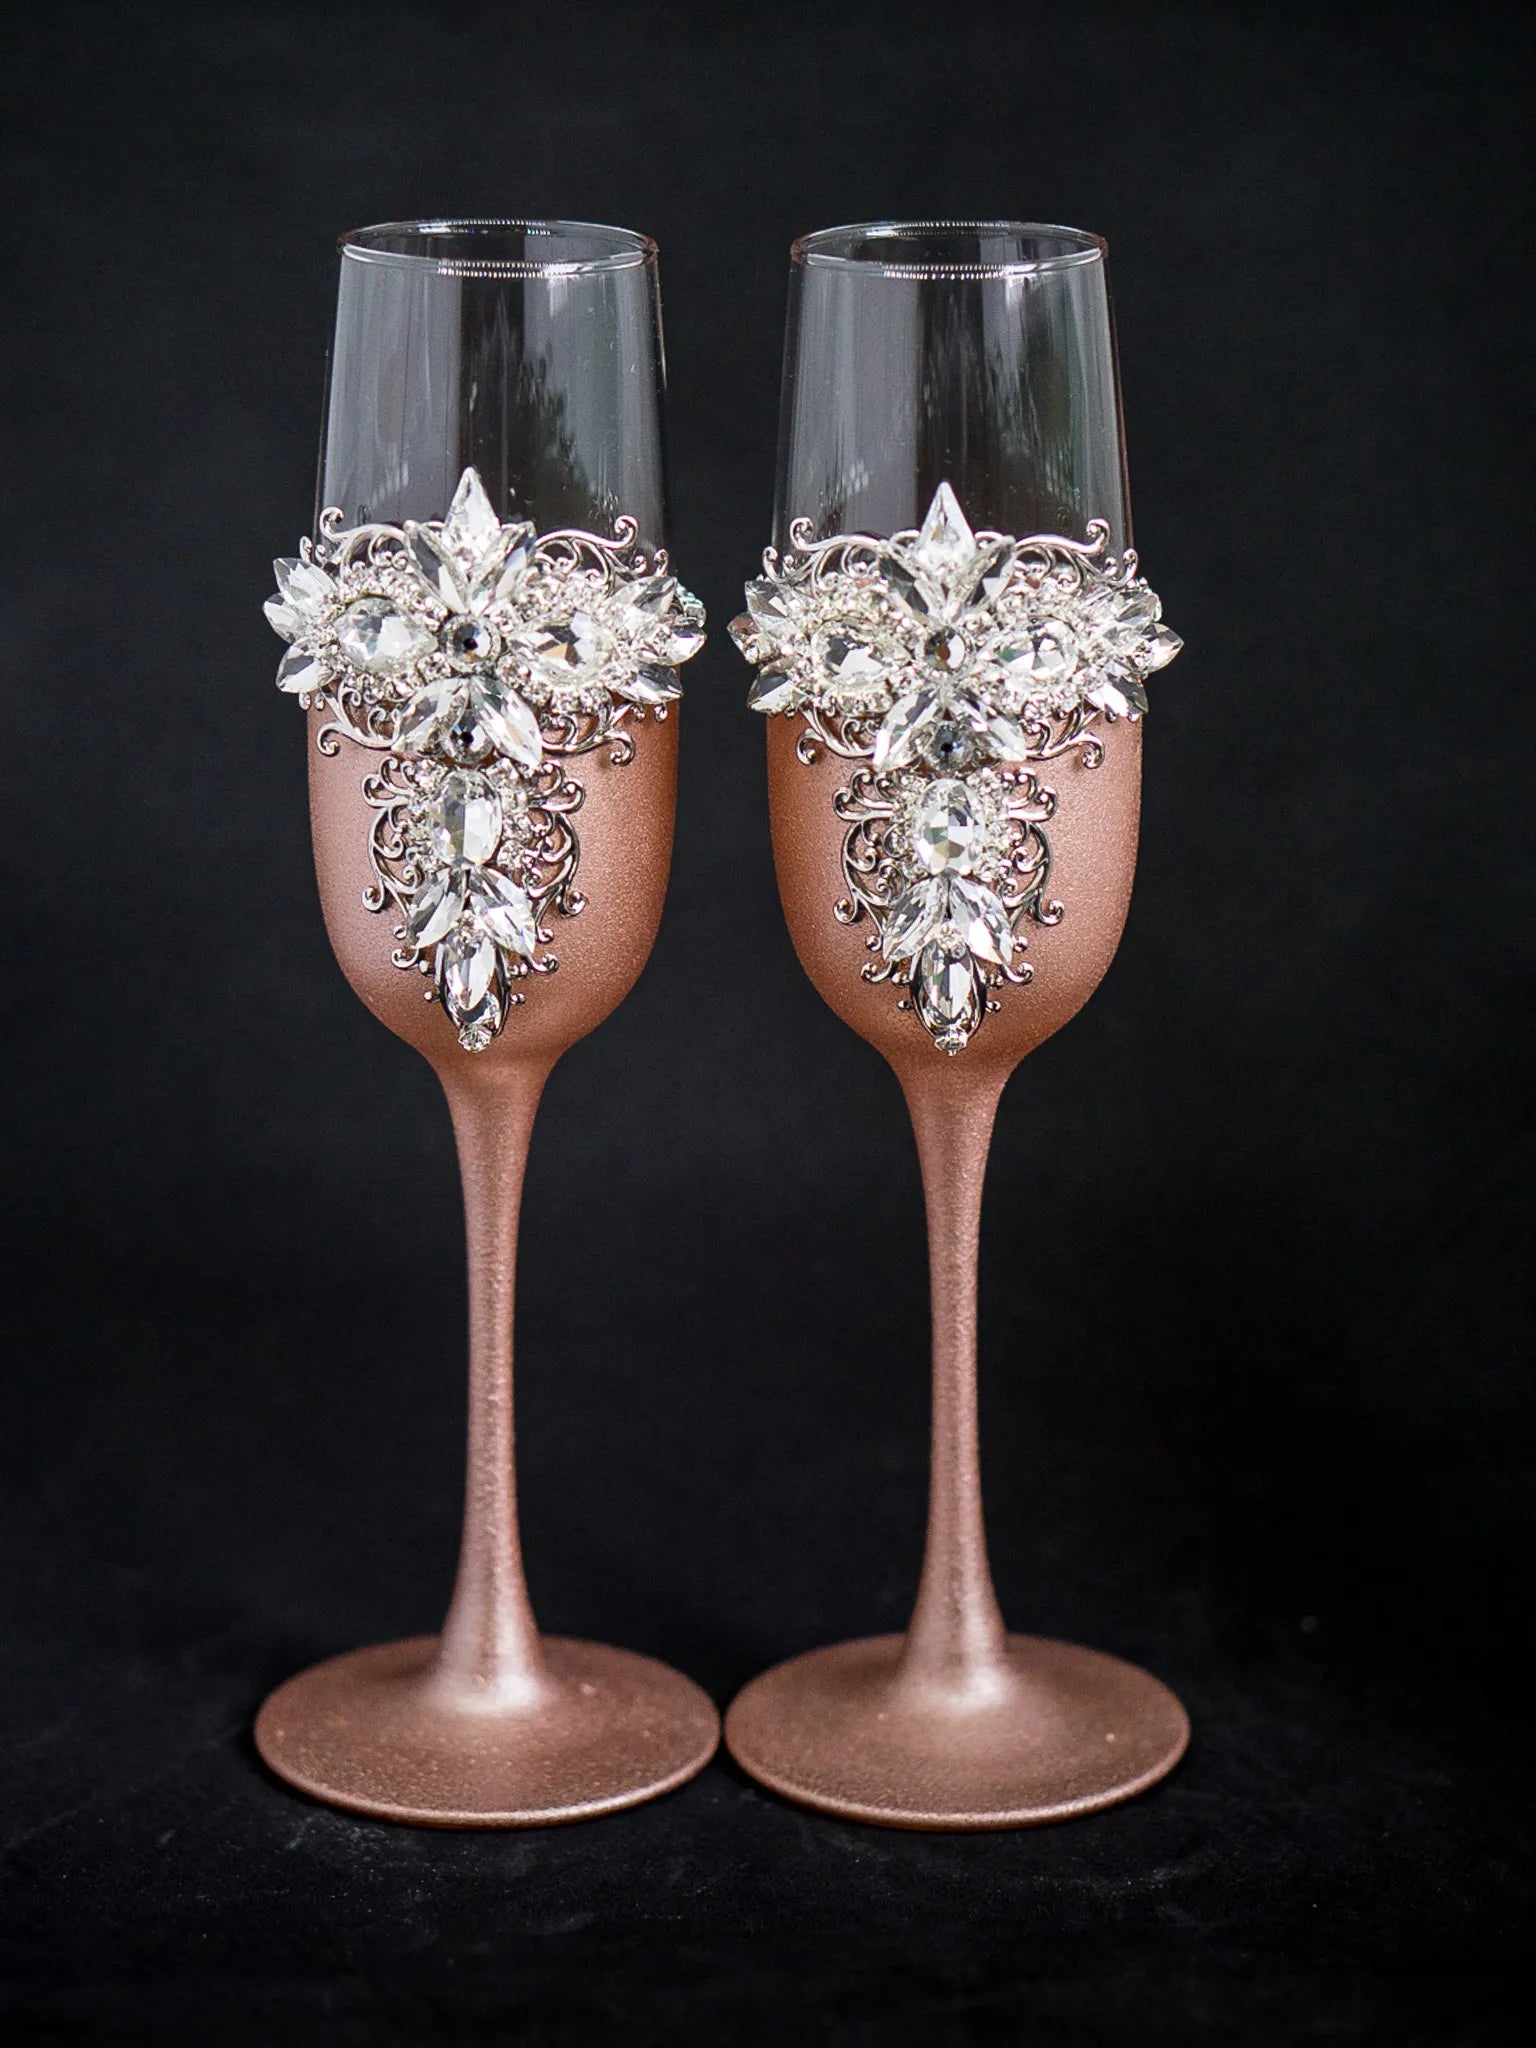 Custom wedding toasting glasses in silver and rose gold